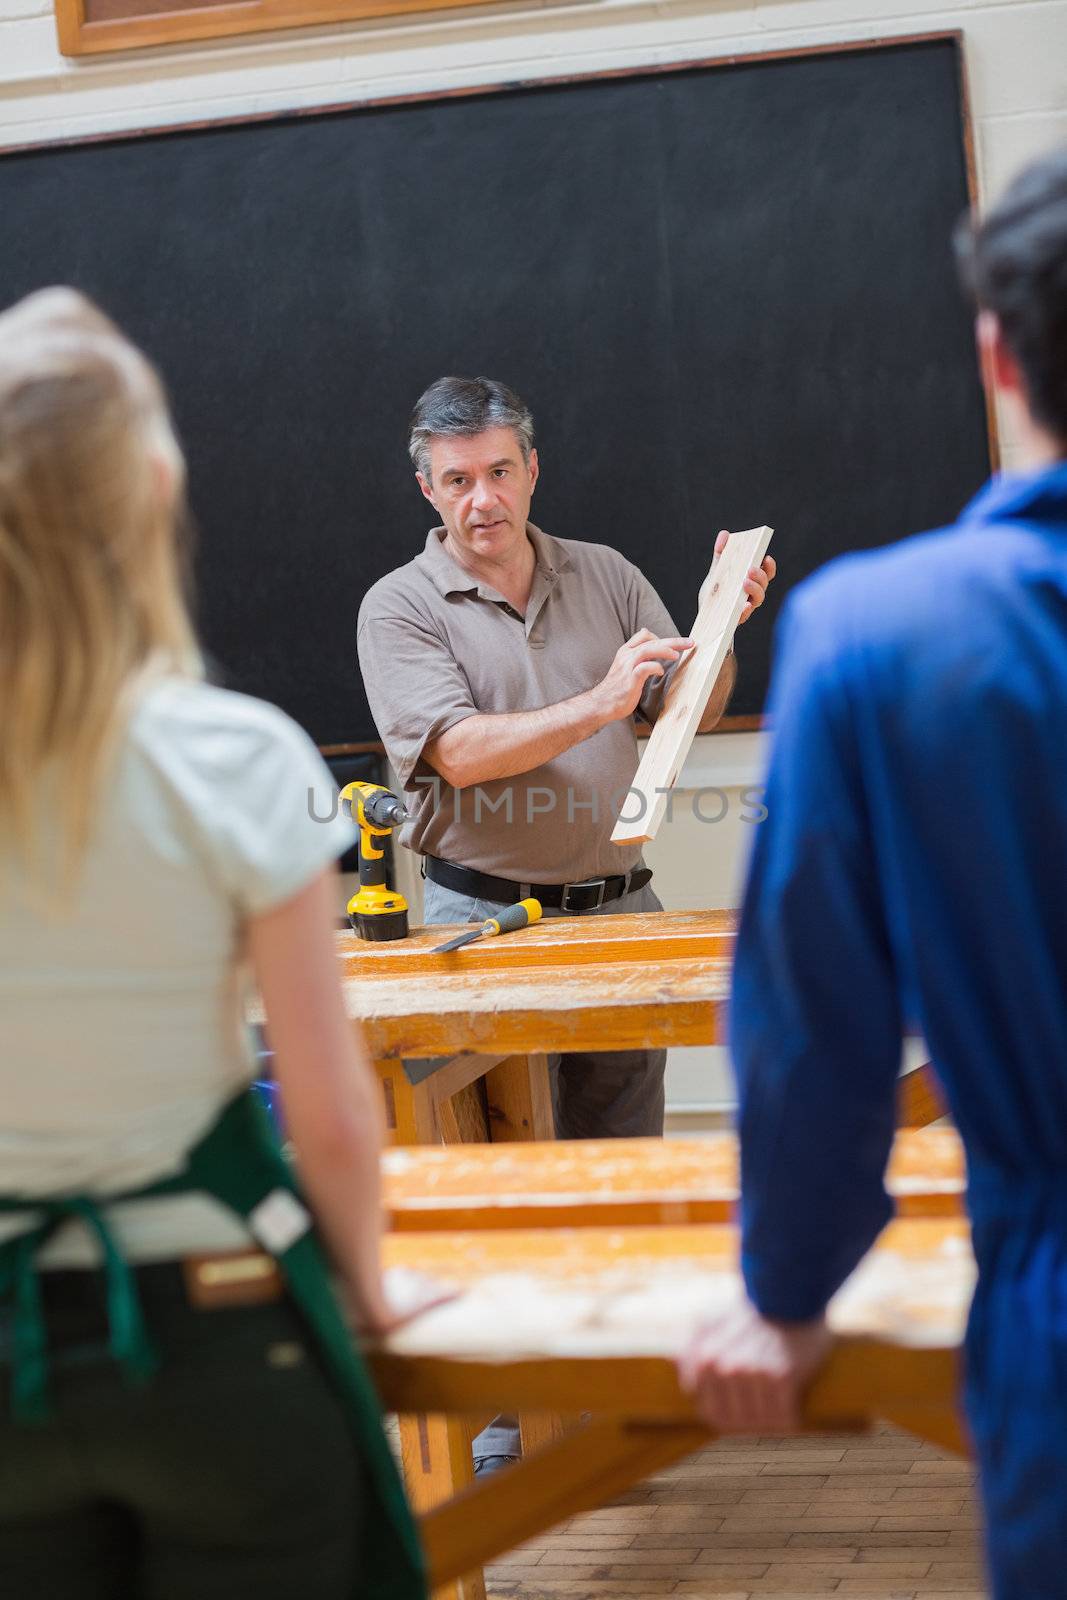 Teacher holding a wooden board while explaining something to his class